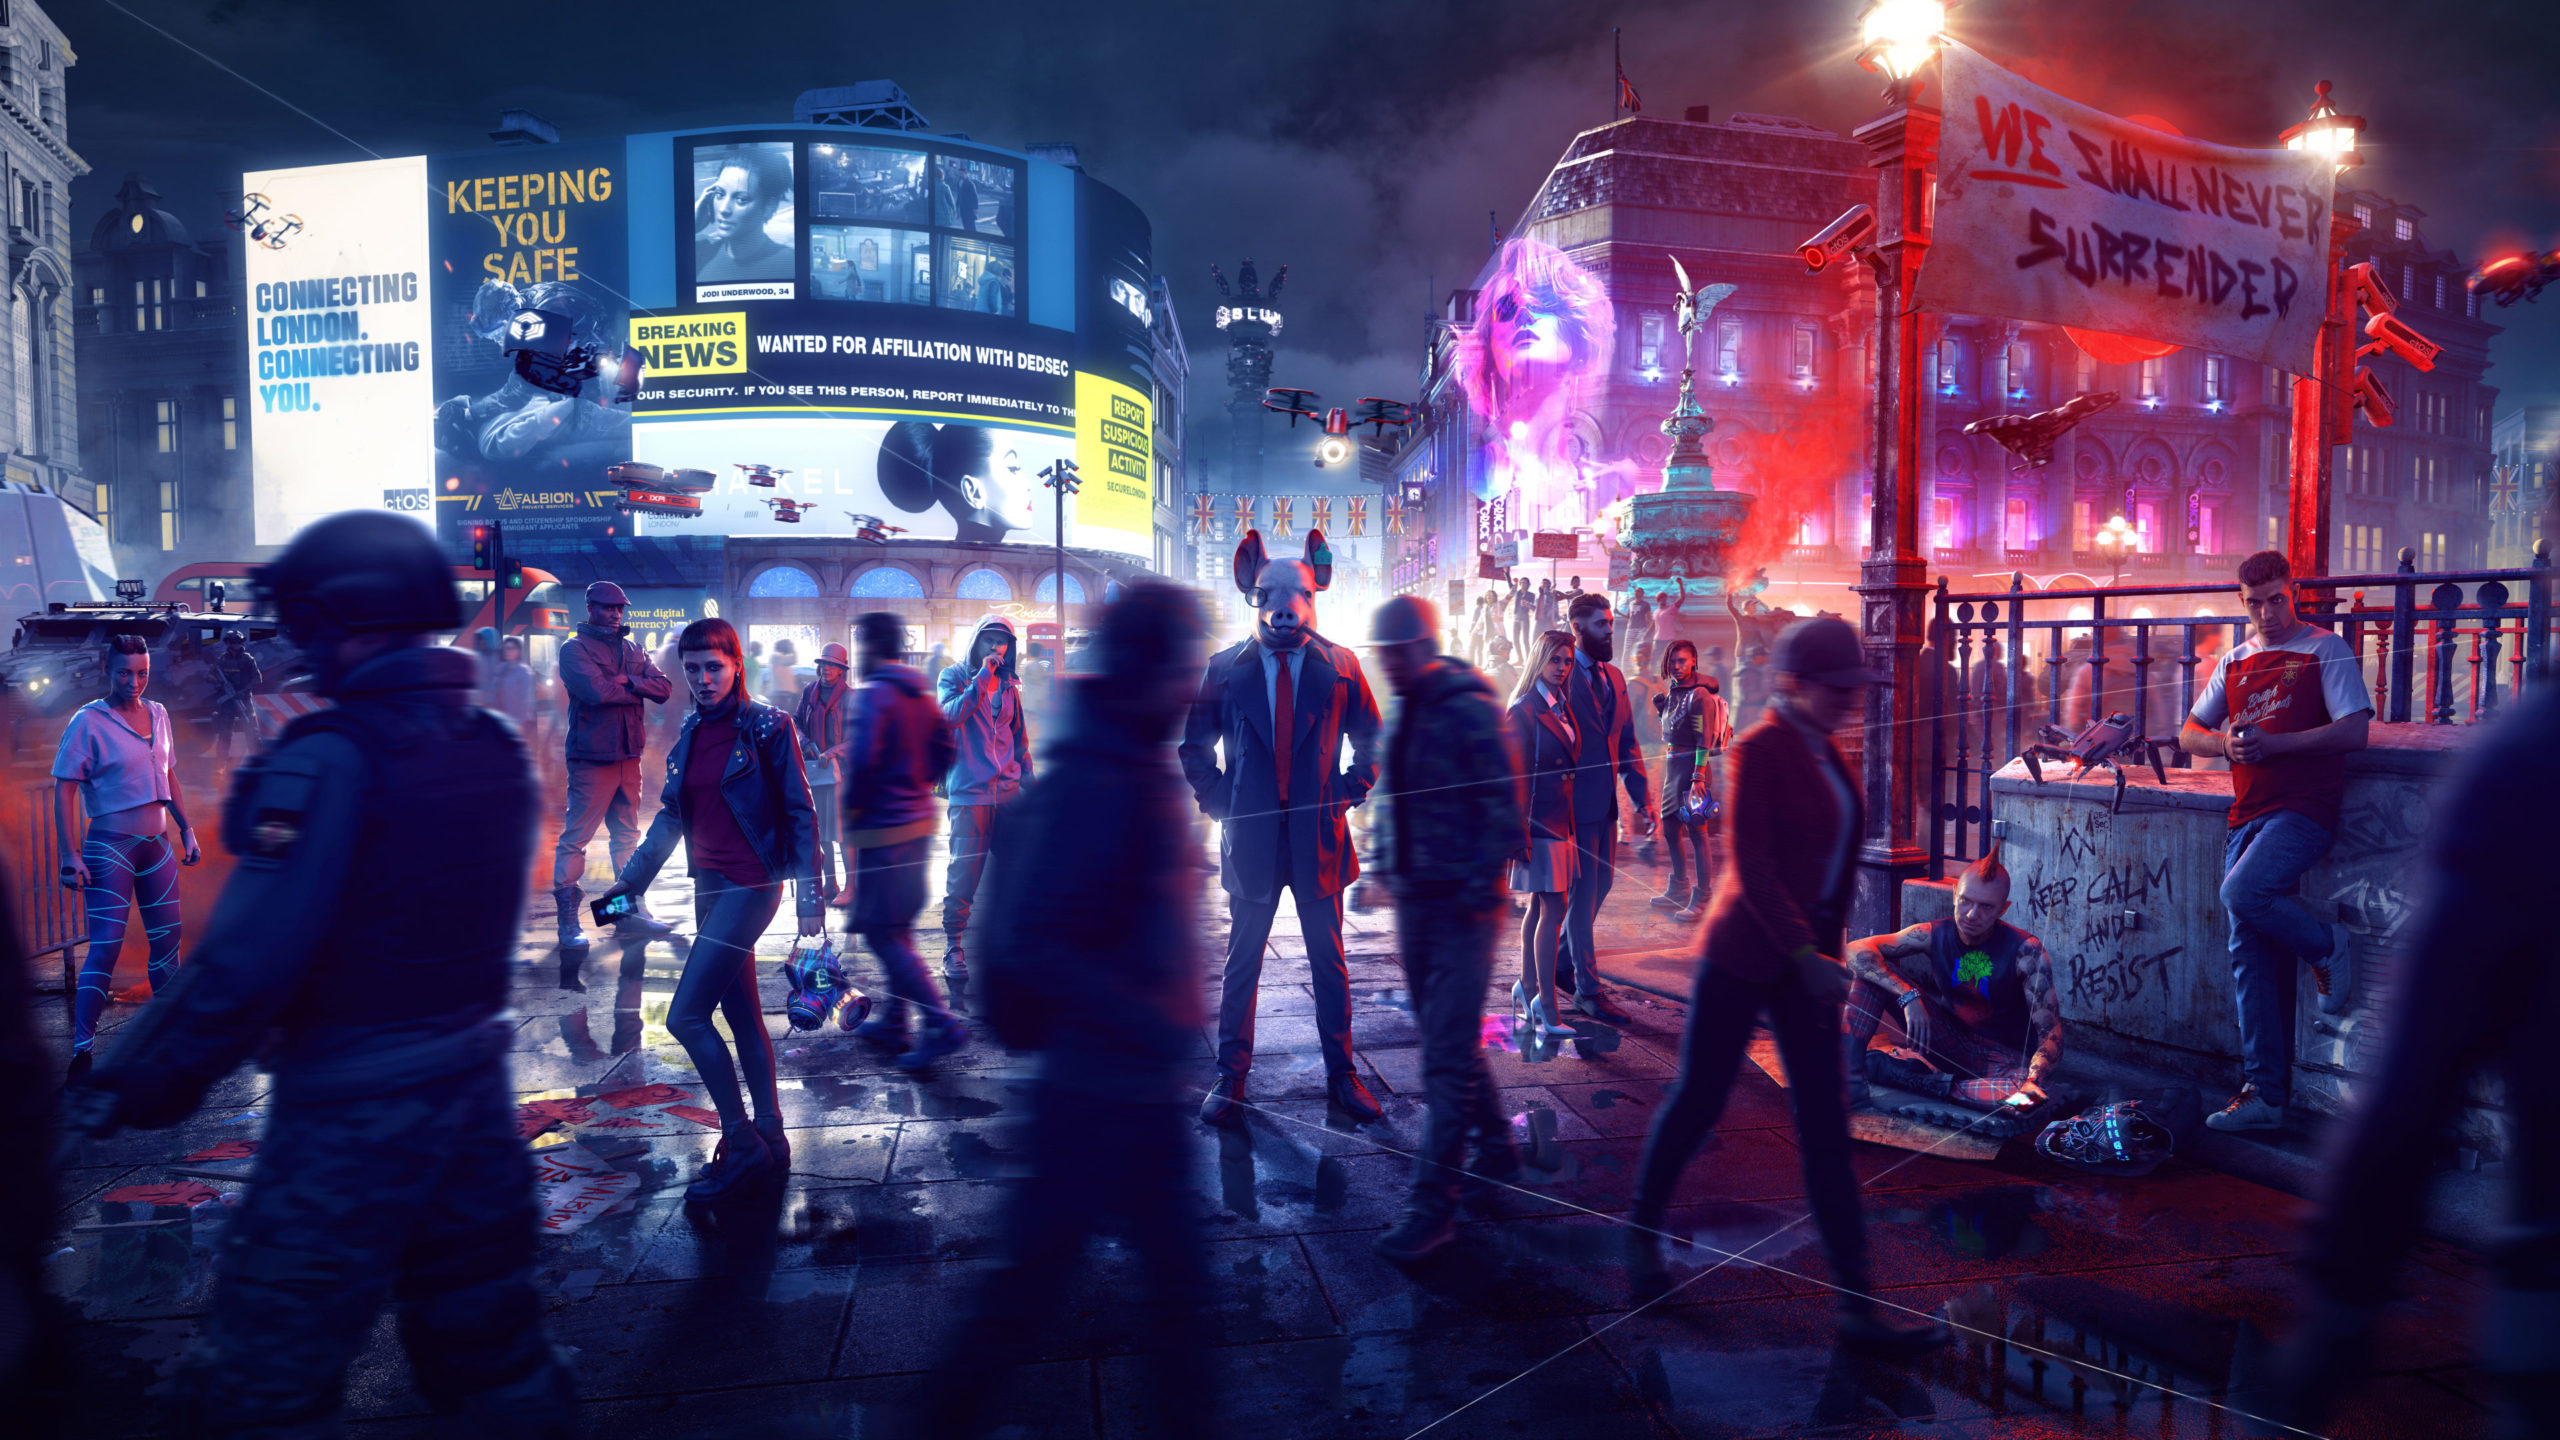 watch dogs ps4 rating